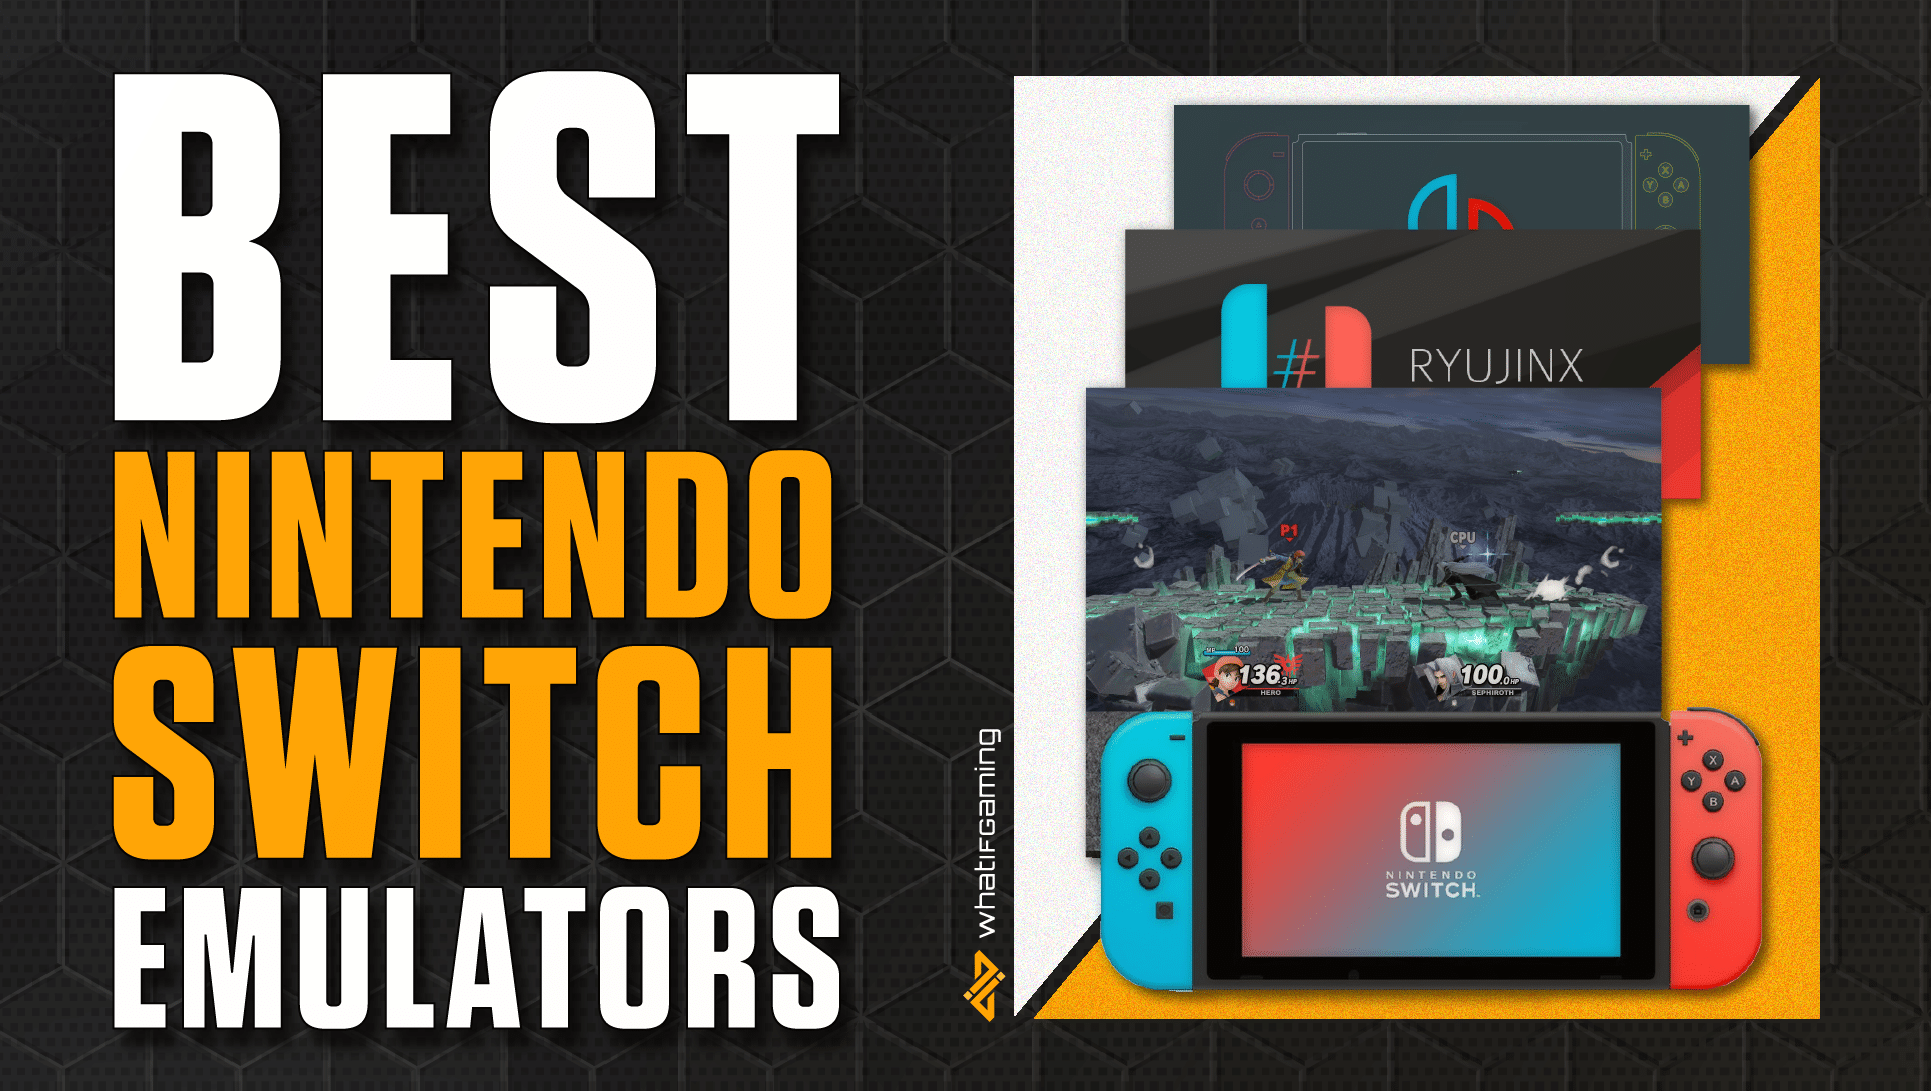 Top 3 Android Emulators for Nintendo Switch - Which is Best